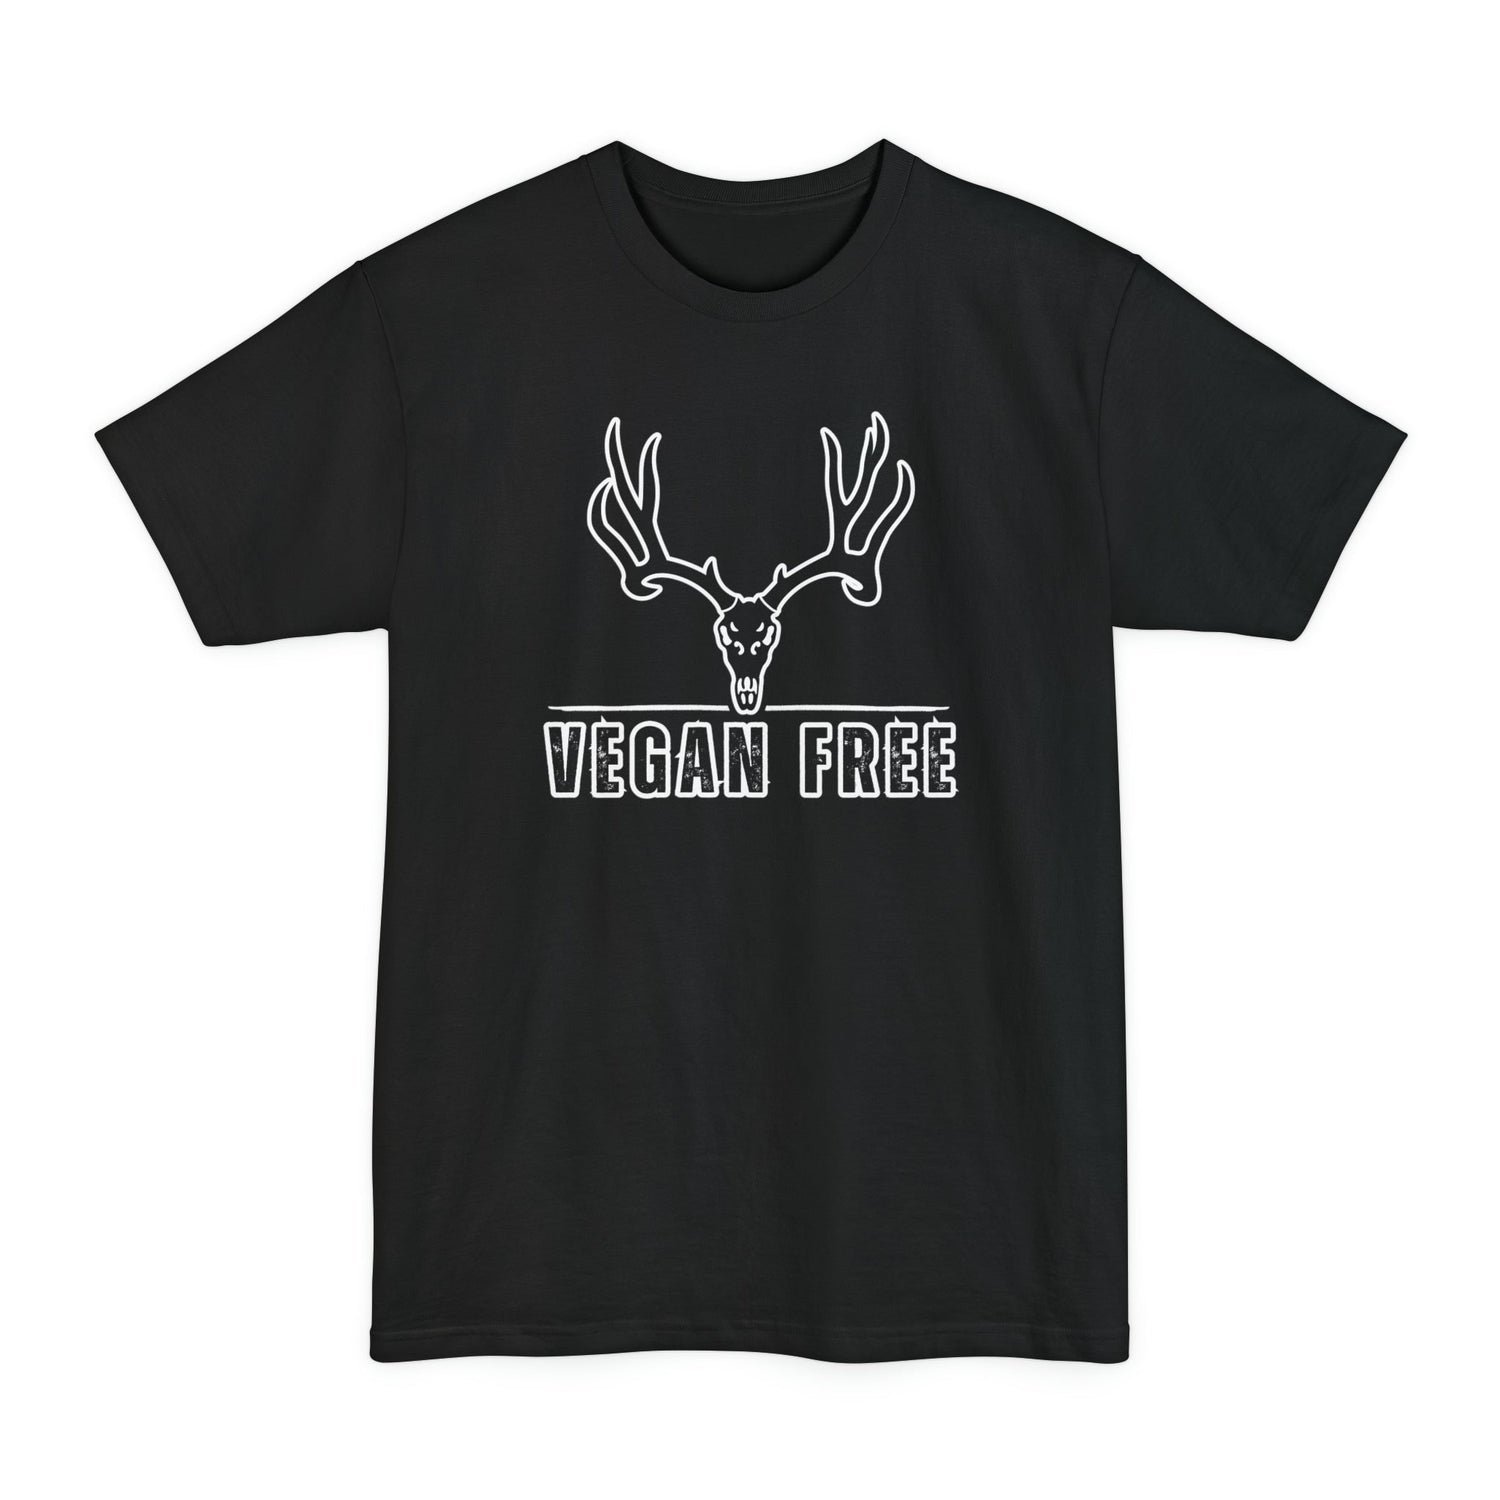 Big and tall deer hunting t-shirt, color black, front design placement